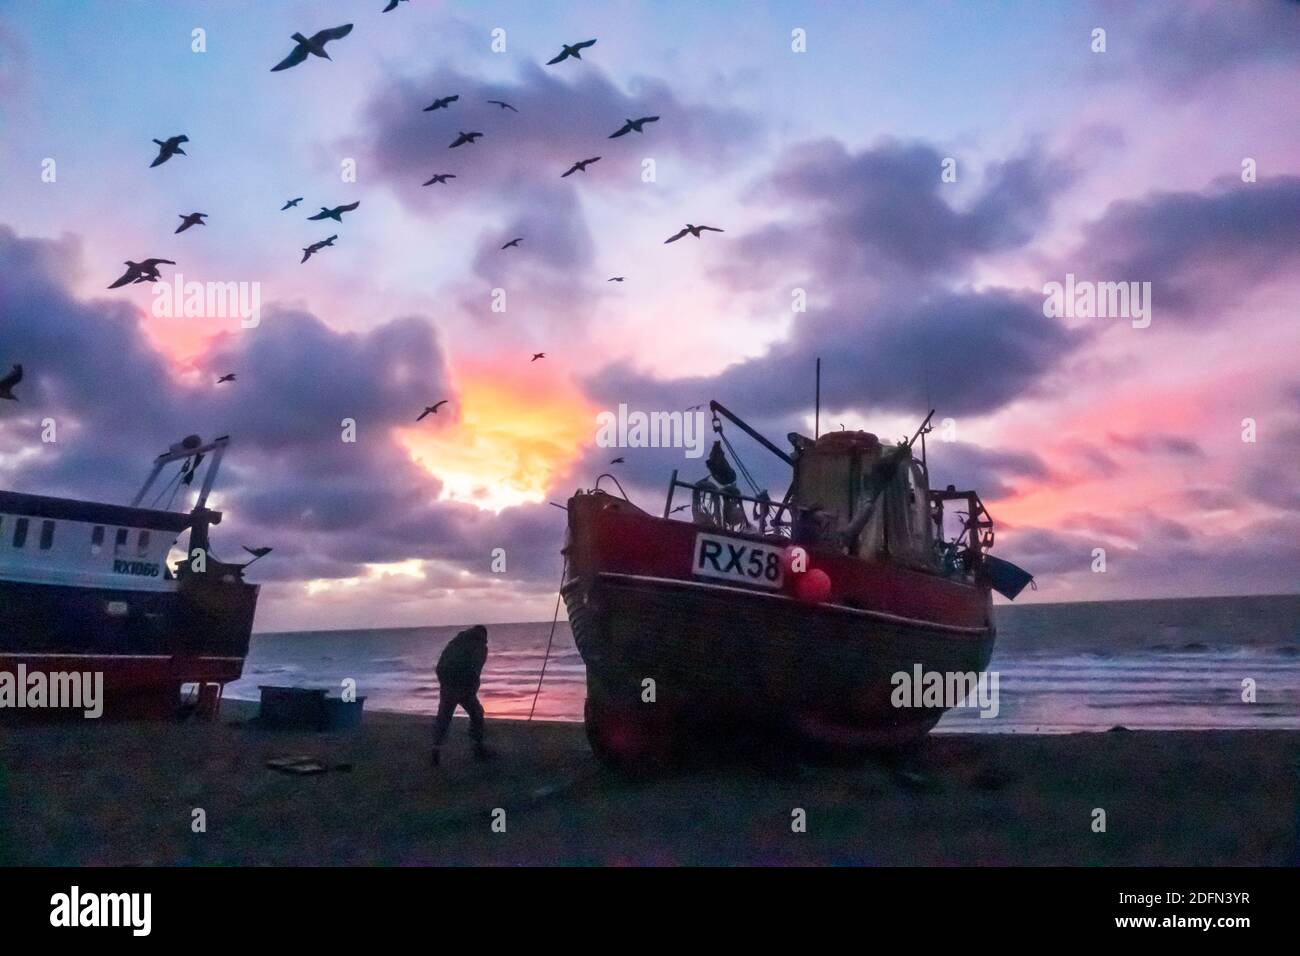 Hastings, East Sussex. 5th December 2020. Seagulls swirl at dawn over Hastings fishing boats with a colourful sunrise over the English Channel, on the day of Boris Johnson's talks with EU President of the European Commission, Ursula von Leyen,  to try to break the deadlock over Brexit fishing rights in British waters and secure a last minute trade deal. UK EU. Winter sunrise UK Stock Photo